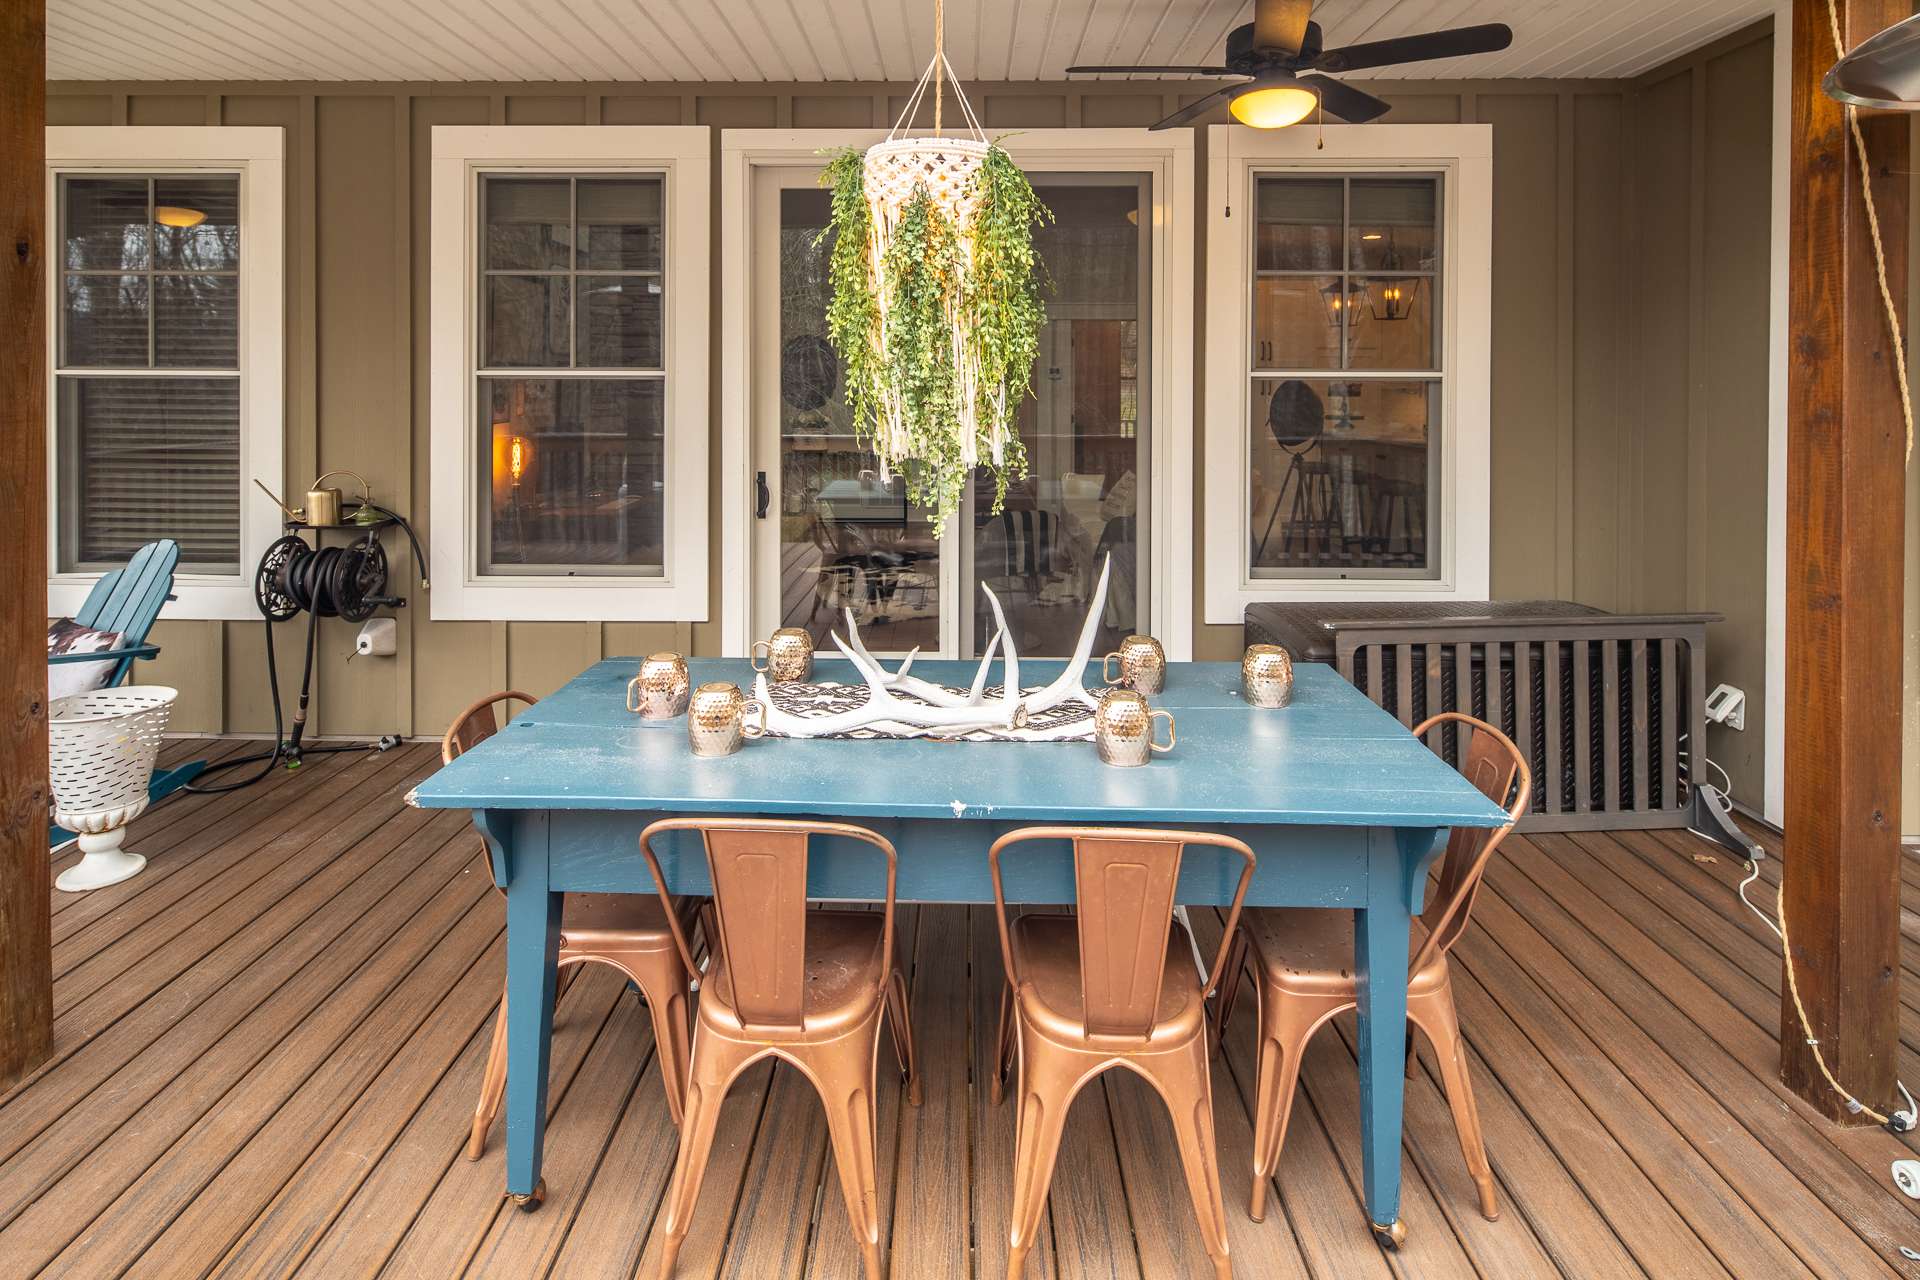 Enjoy outdoor dining and relaxing on the partially covered back deck.